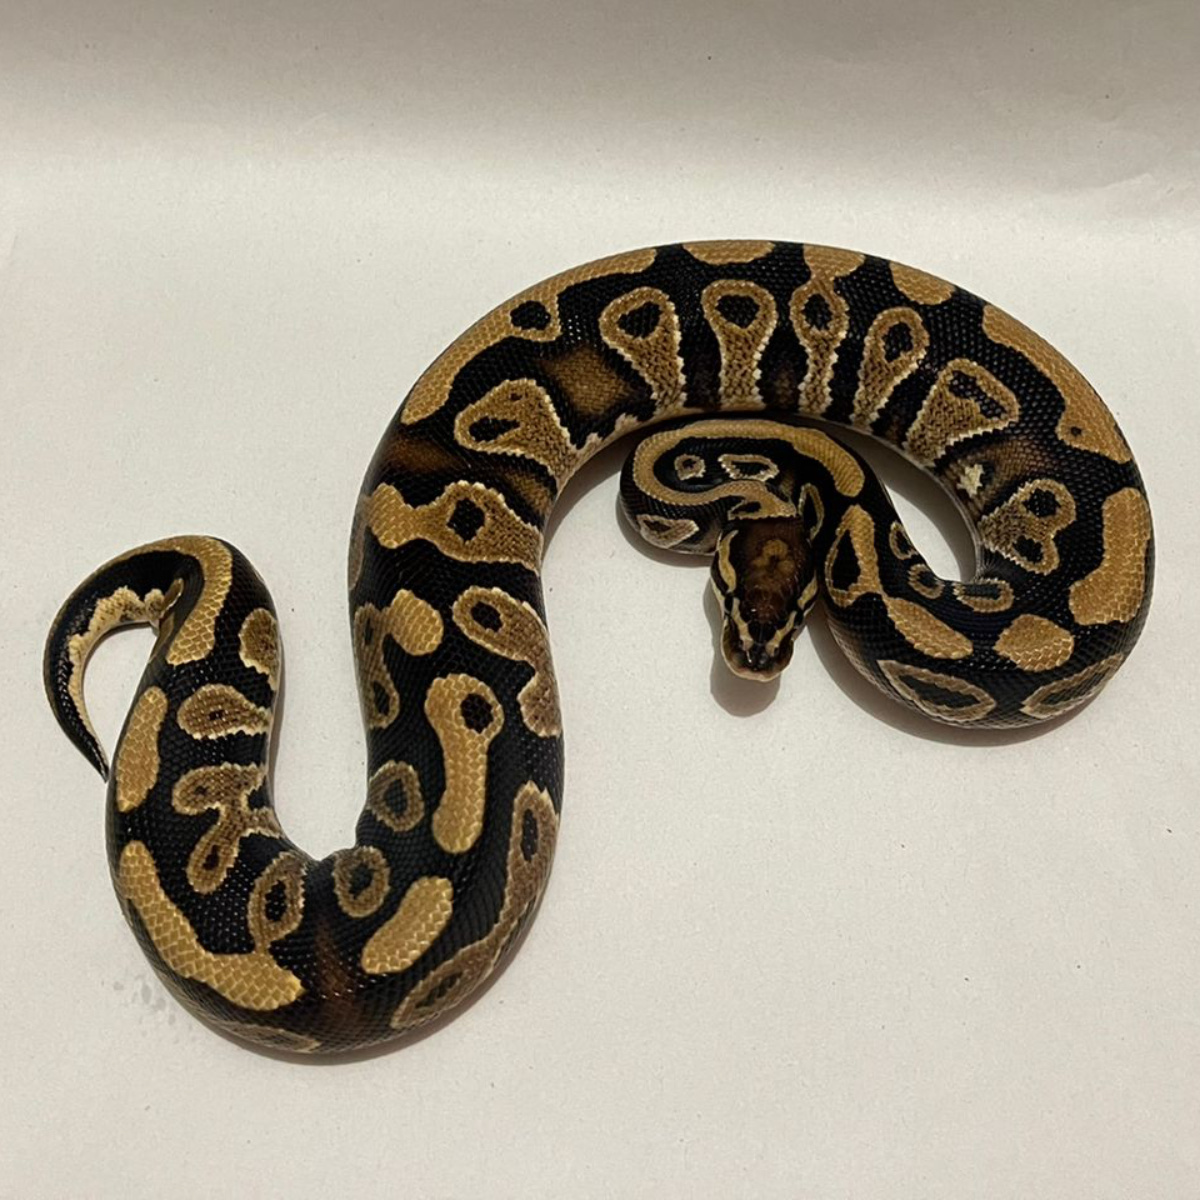 1.0 2020 Yellowbelly Double Het Pied Clown Male